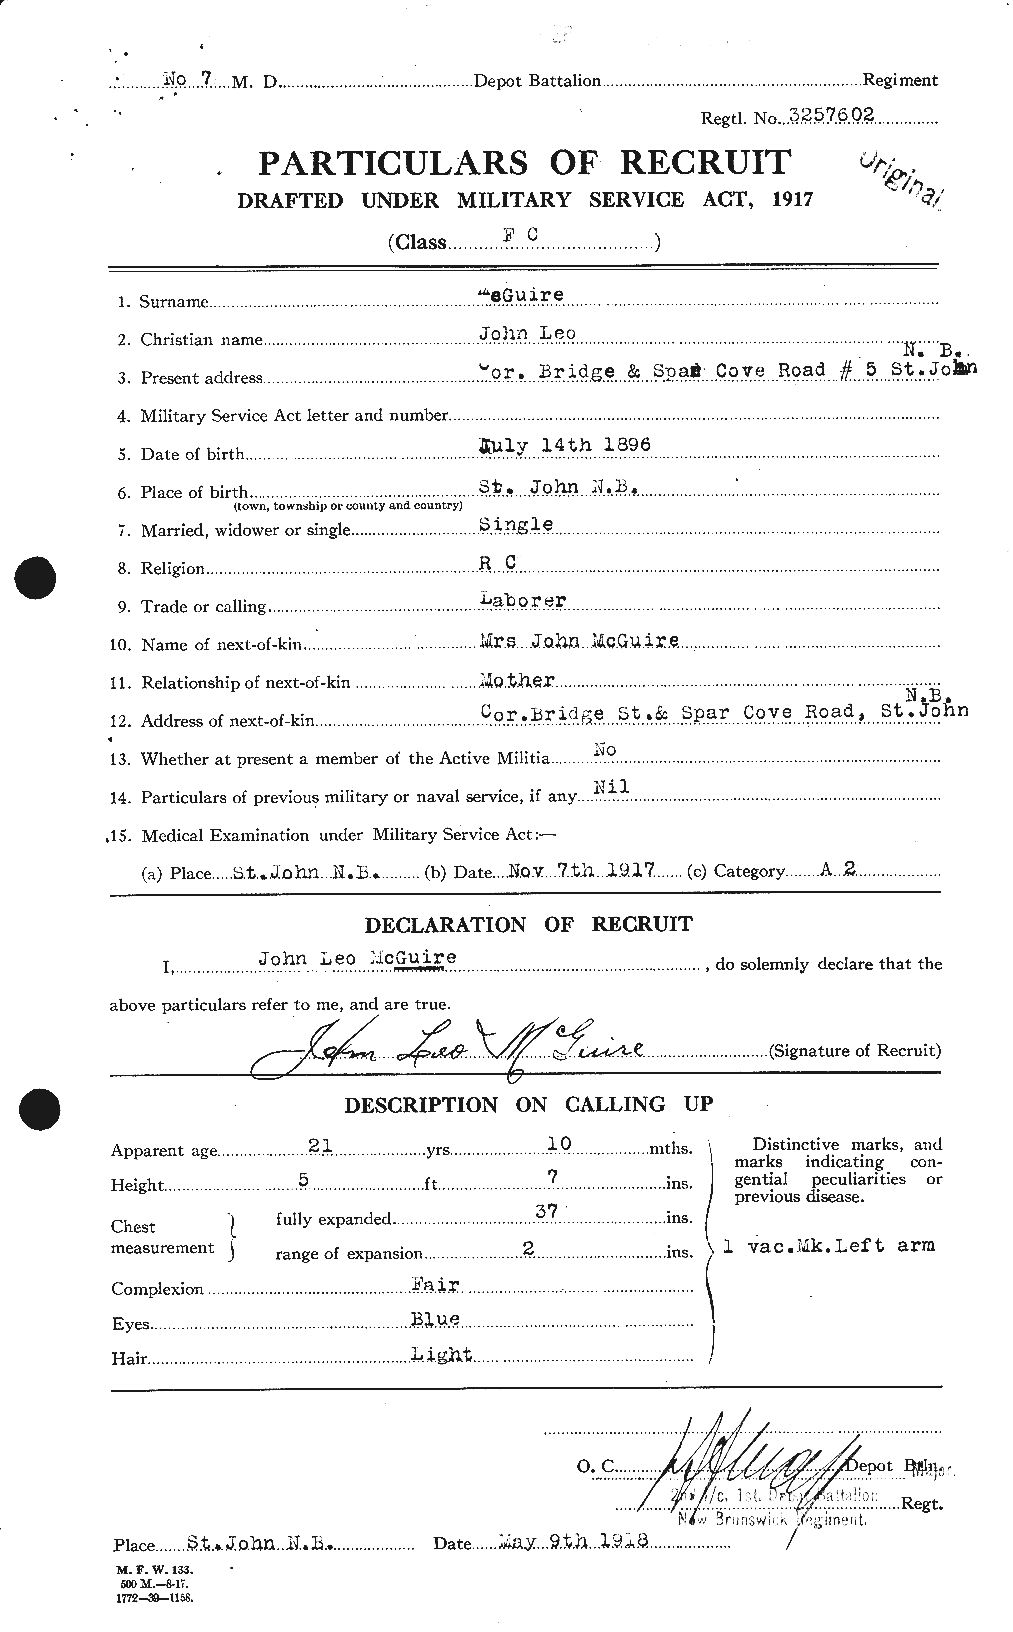 Personnel Records of the First World War - CEF 523373a